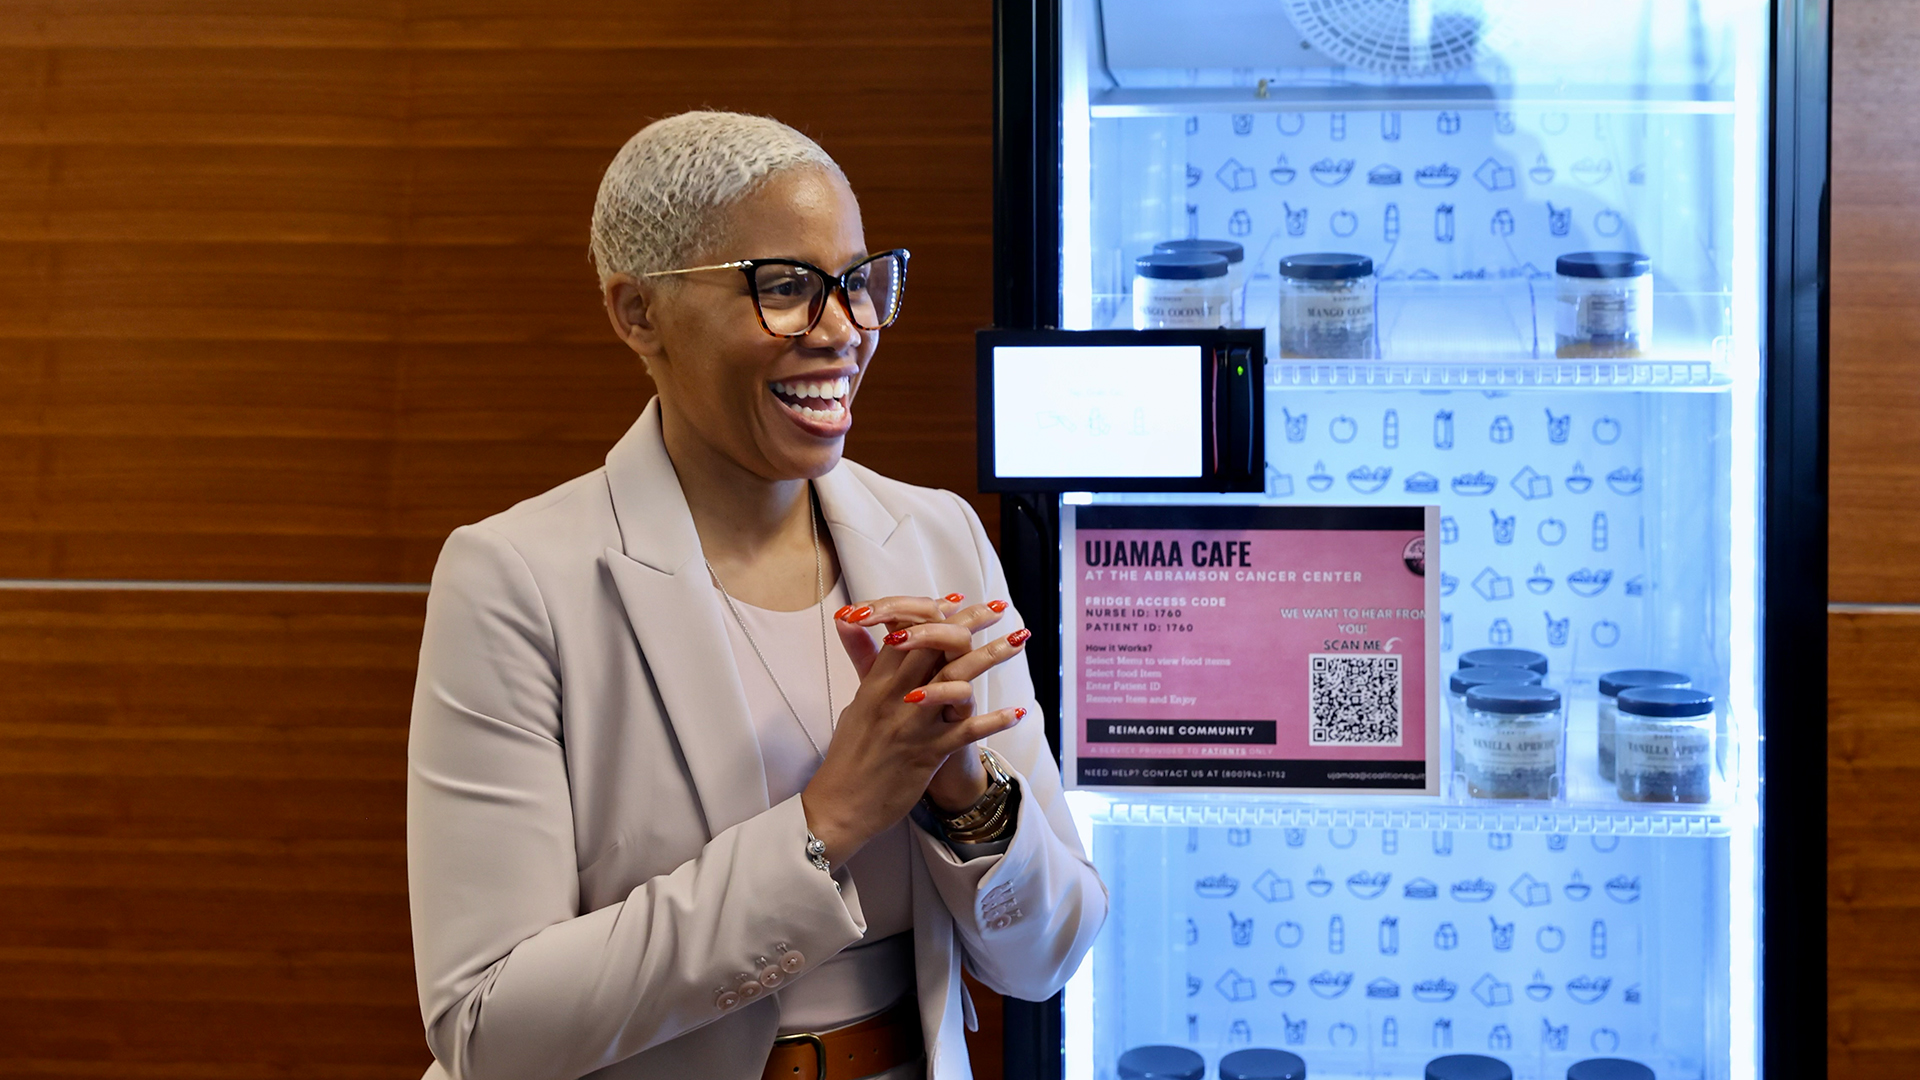 Dr. Leeja Carter Created A Smart Refrigerator To Provide Healthy Food Options In Food Deserts Across New Jersey